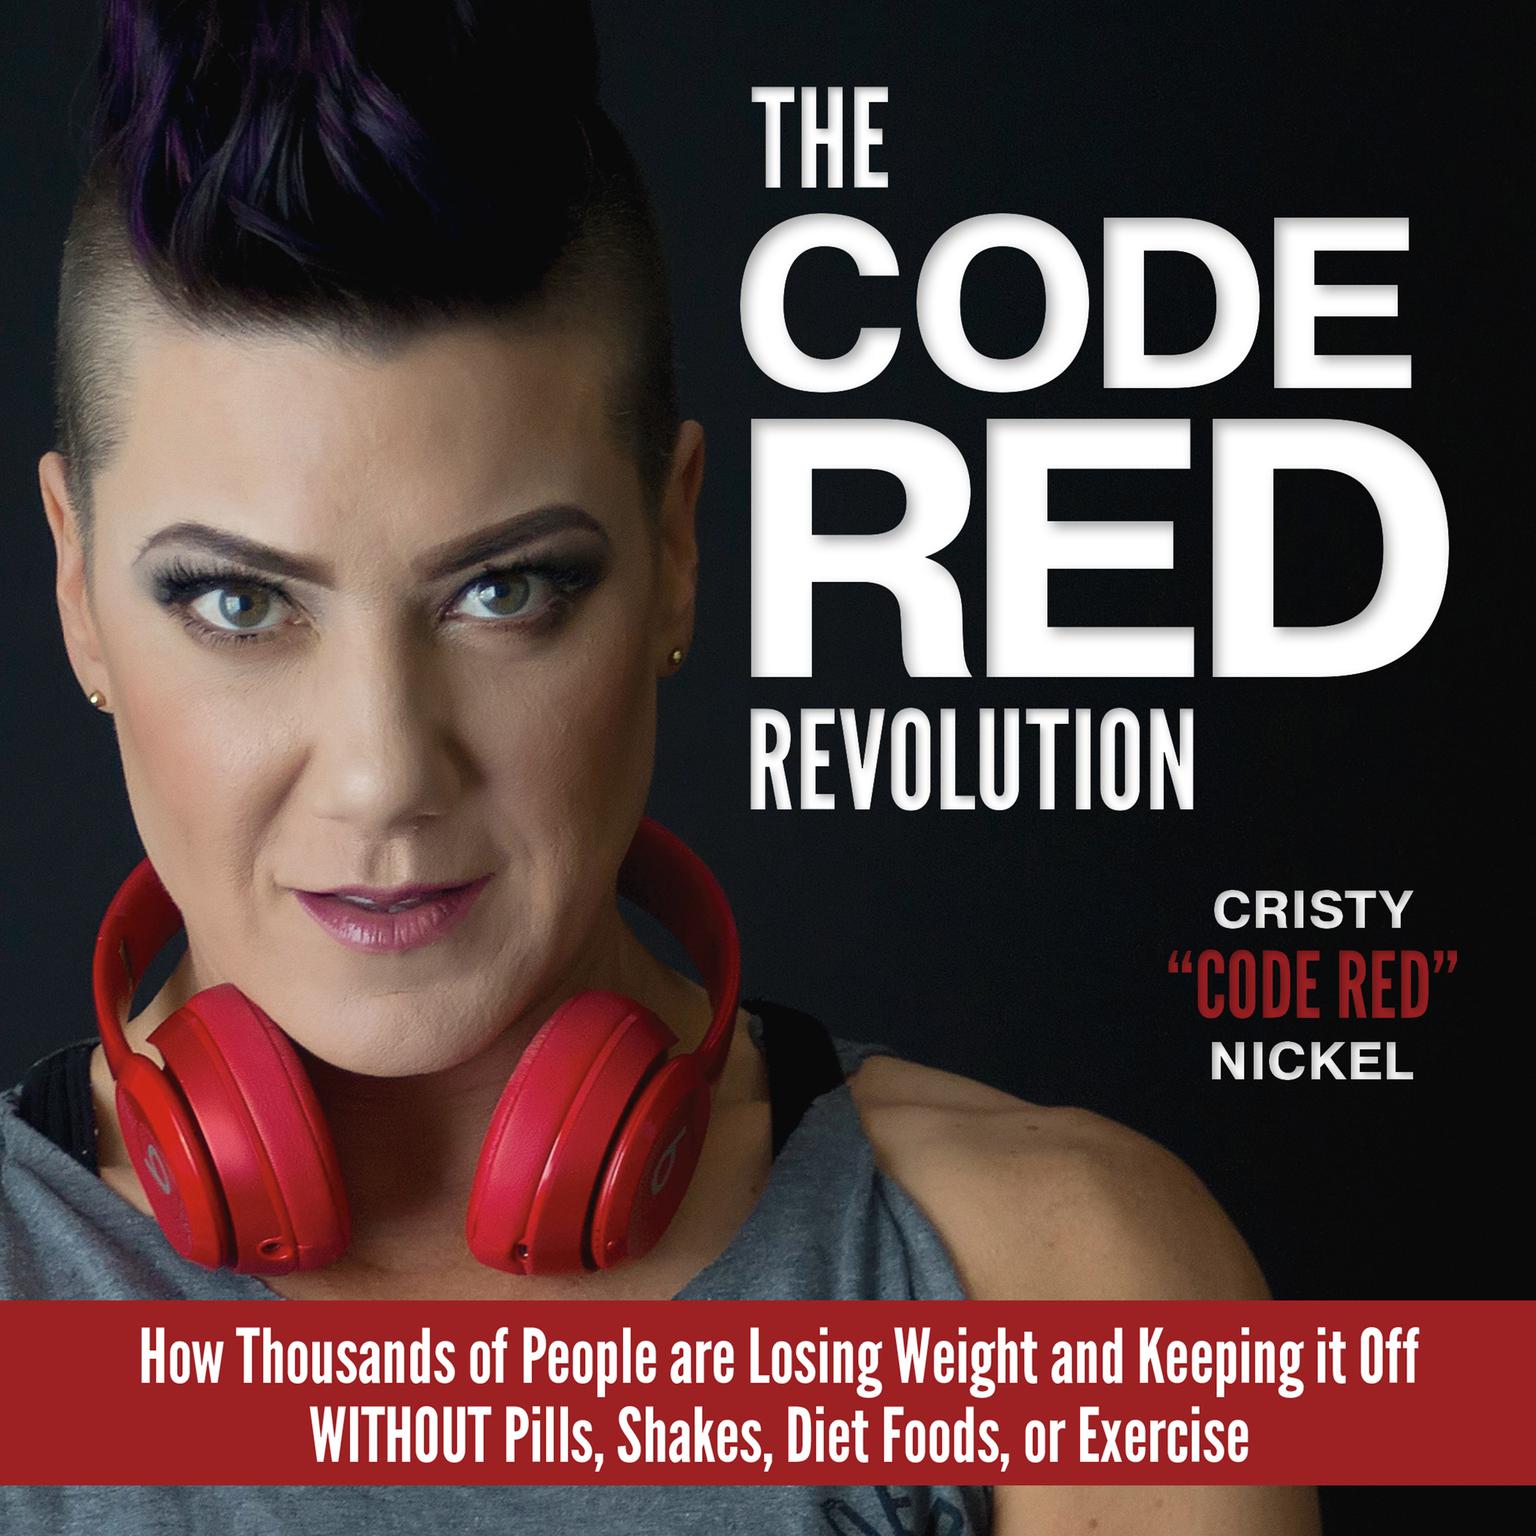 The Code Red Revolution: How Thousands of People are Losing Weight and Keeping It Off WITHOUT Pills, Shakes, Diet Foods, or Exercise Audiobook, by Cristy Nickel